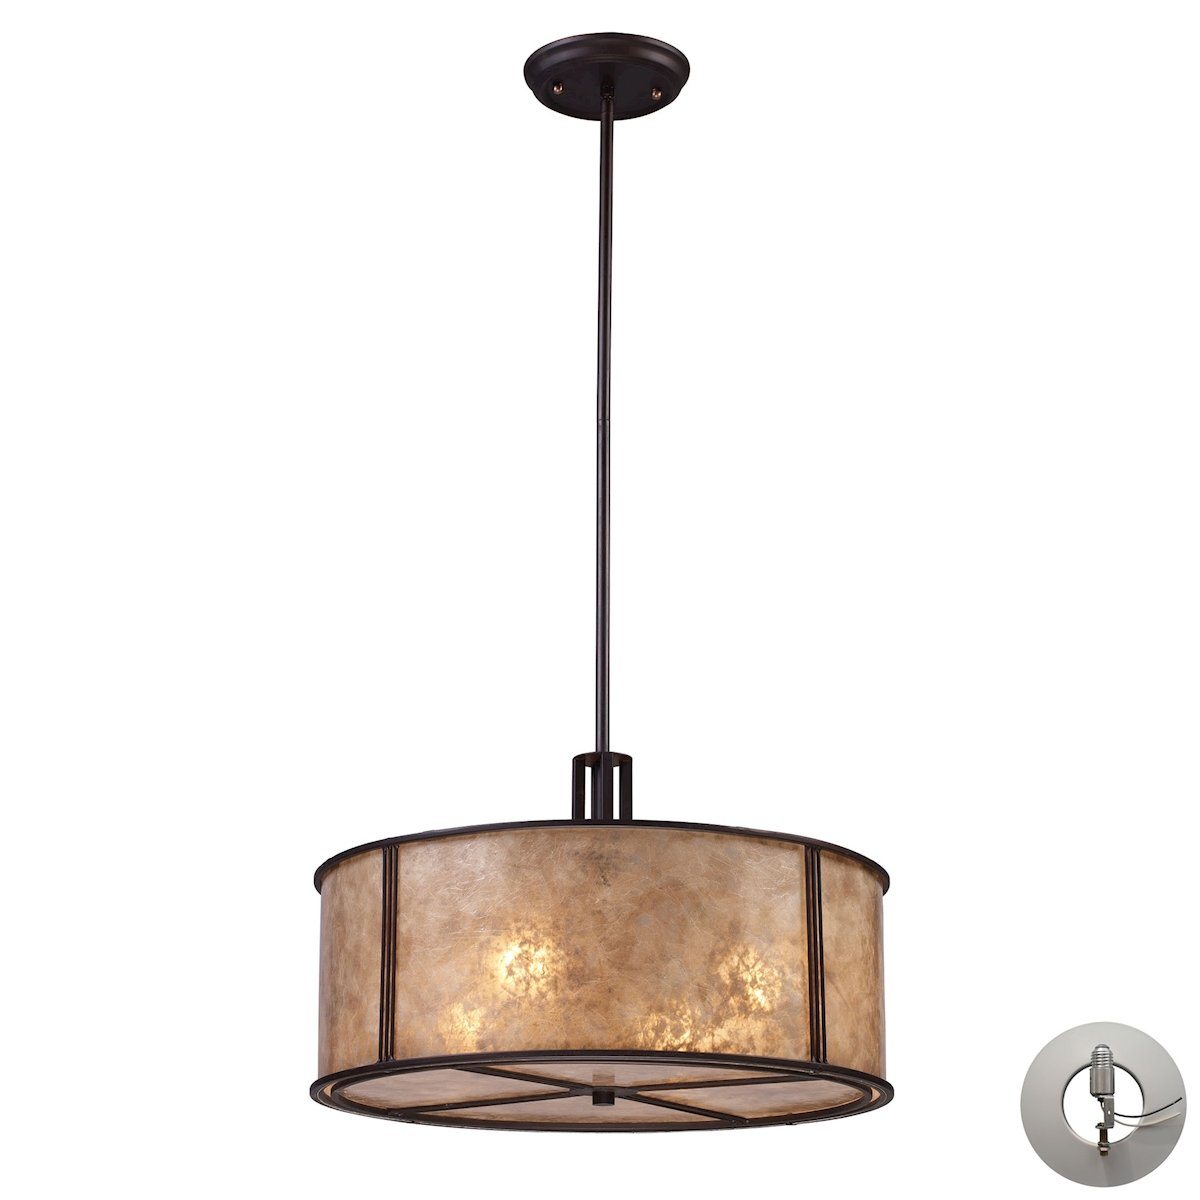 Barringer 4 Light Pendant In Aged Bronze And Tan Mica With Adapter Kit Ceiling Elk Lighting 